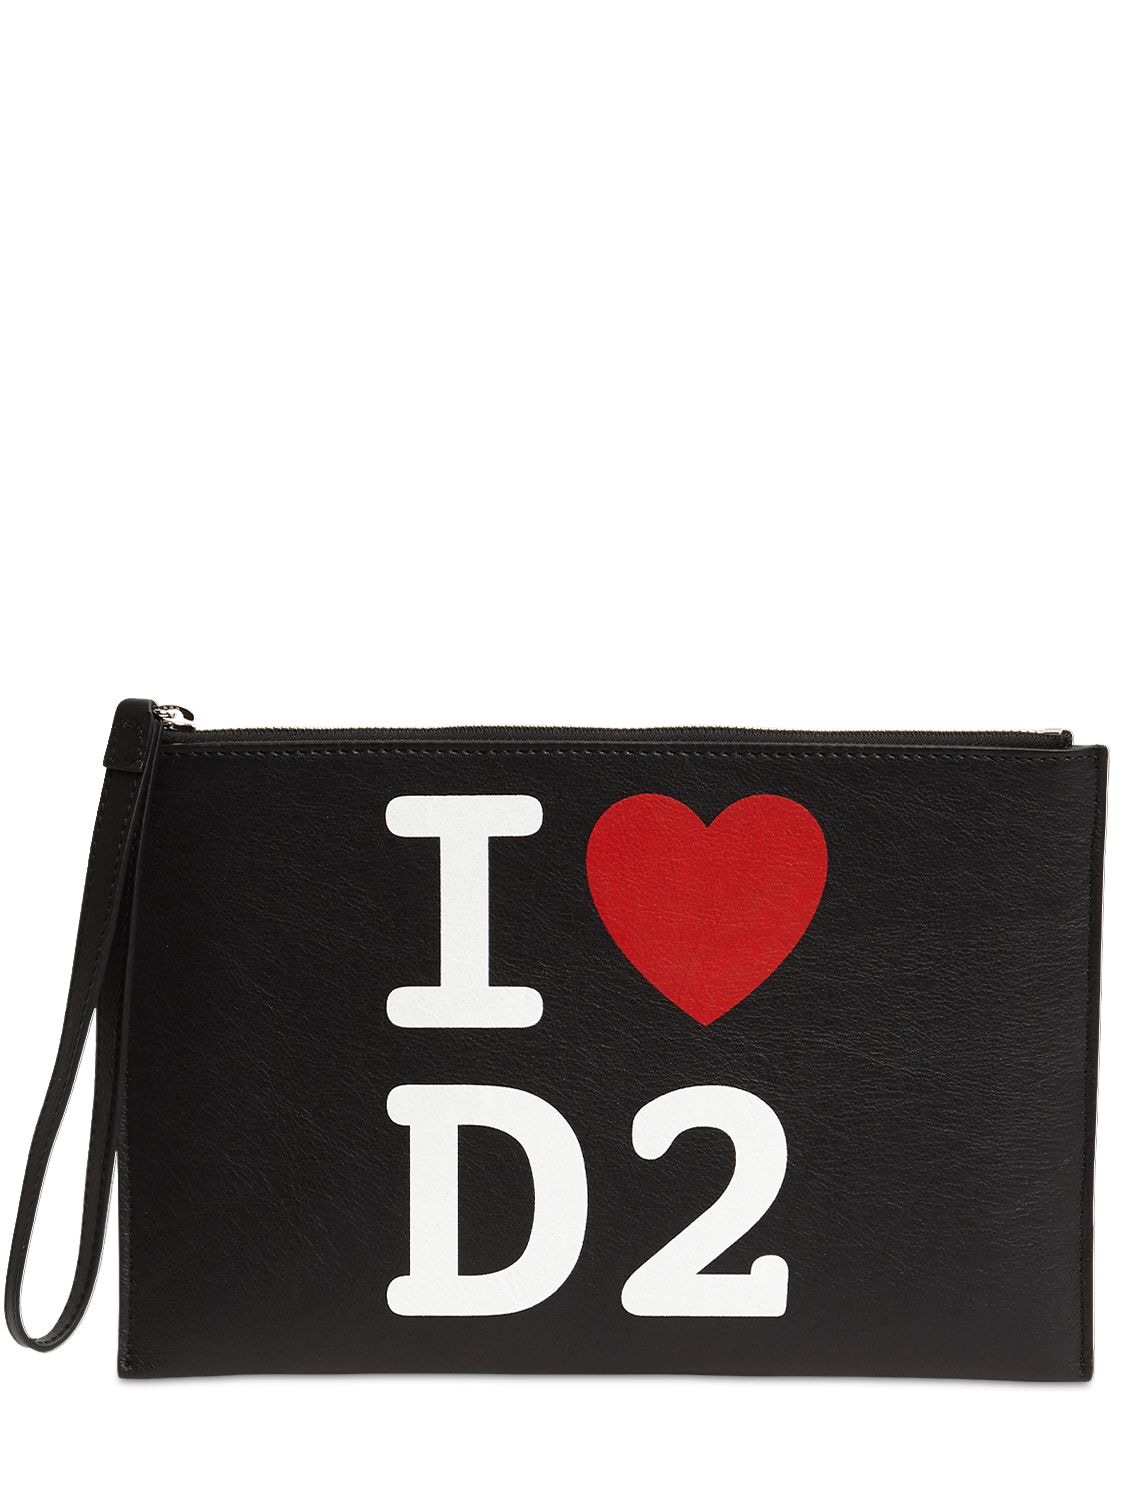 DSQUARED2 LOGO PRINTED LEATHER POUCH,72IA0Y009-MJEYNA2